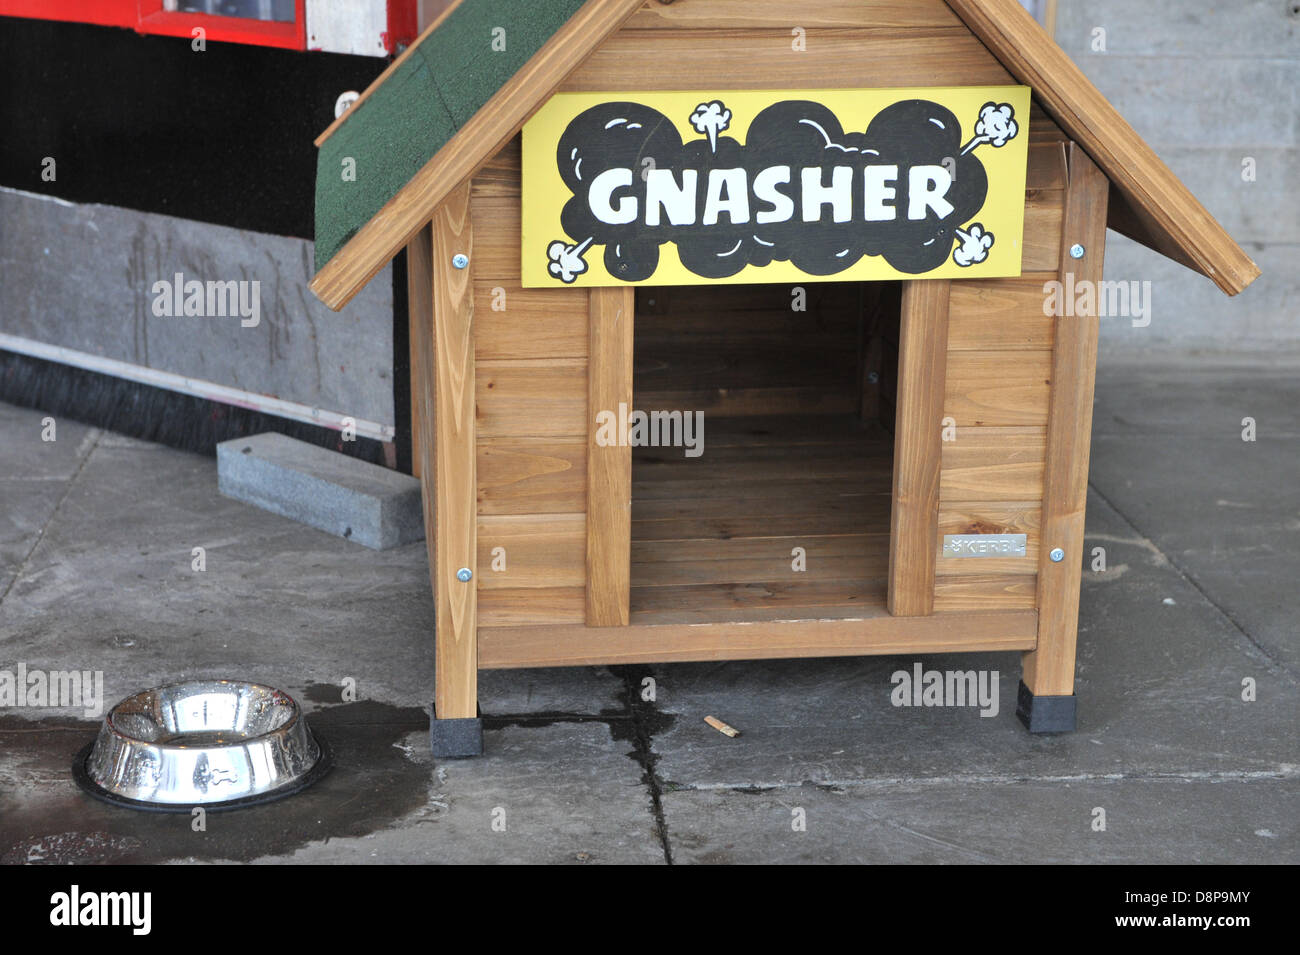 Southbank Centre, London, UK. 2nd June 2013.  A 'Gnasher' kennel with a dish of water for real dogs at Beanotown, a celebration of the children's comic. Beanotown in the Southbank Centre in London, 'Beanotown is the home of Dennis the Menace and Gnasher, The Bash Street Kids, Minnie the Minx, Roger the Dodger, plus all the other comic strip superstars from The Beano'. Beanotown is on from 31st May to 8th September. Credit:  Matthew Chattle/Alamy Live News Stock Photo